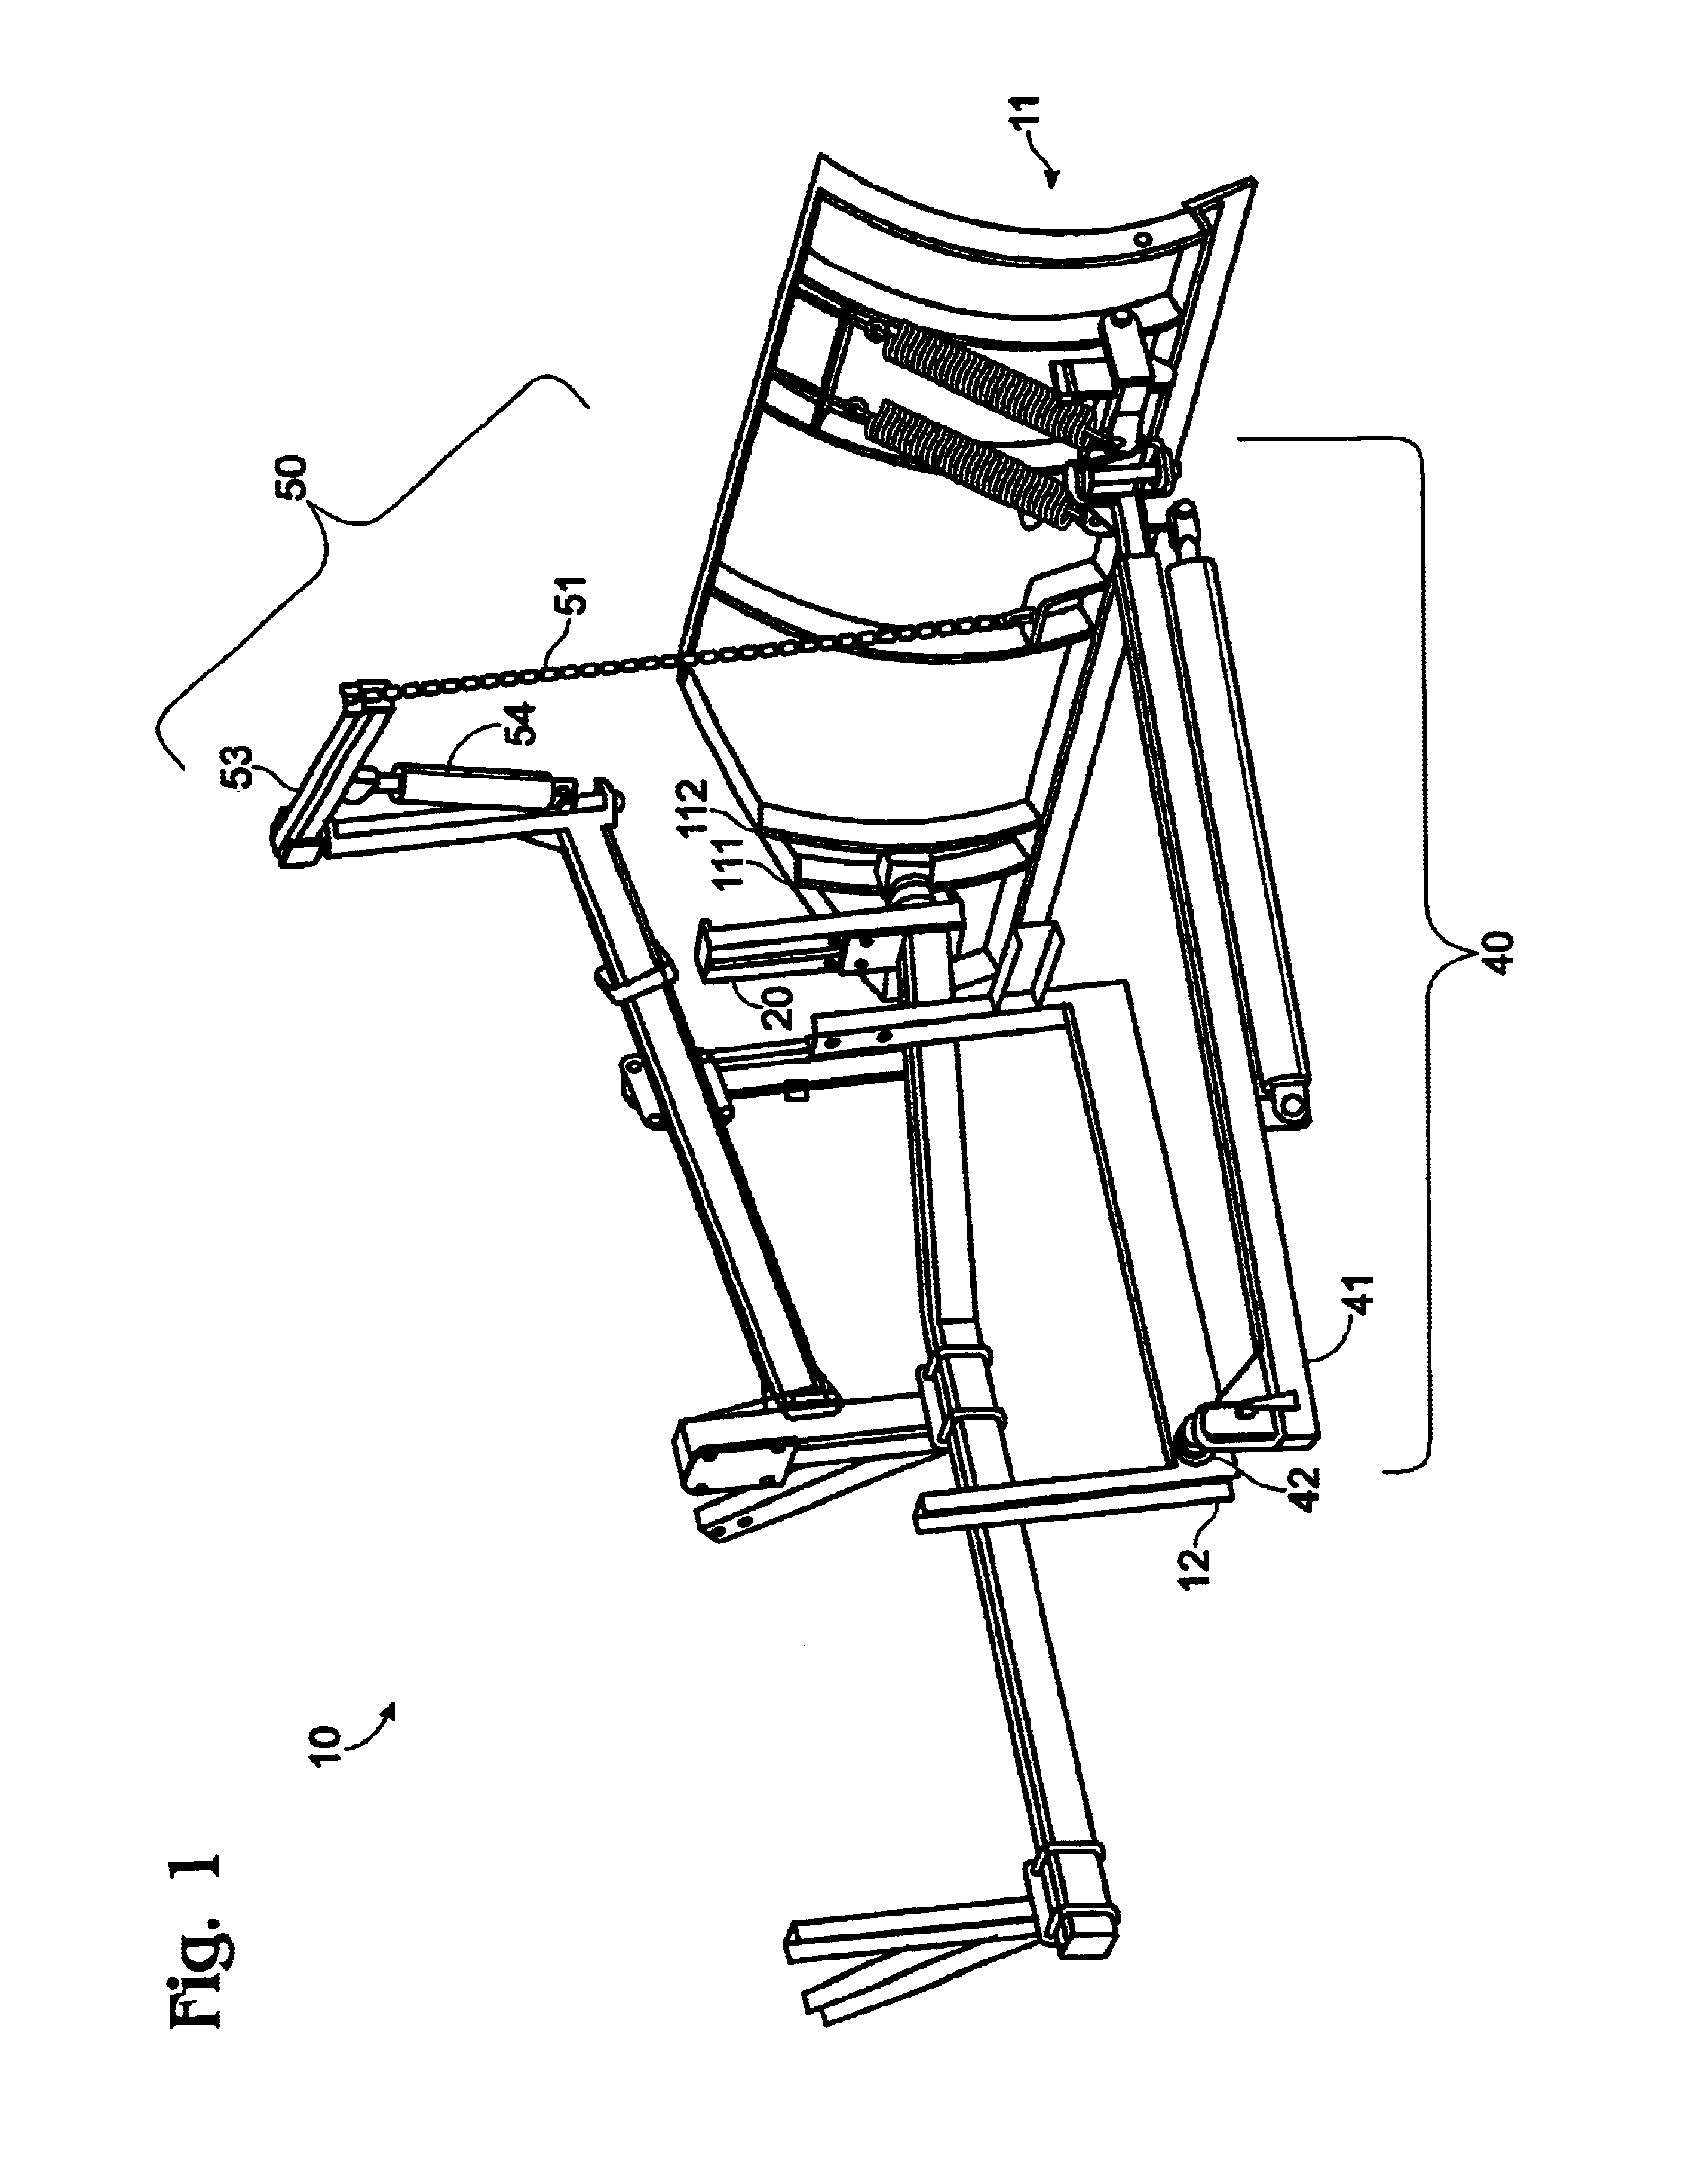 Adjustable side plow assembly